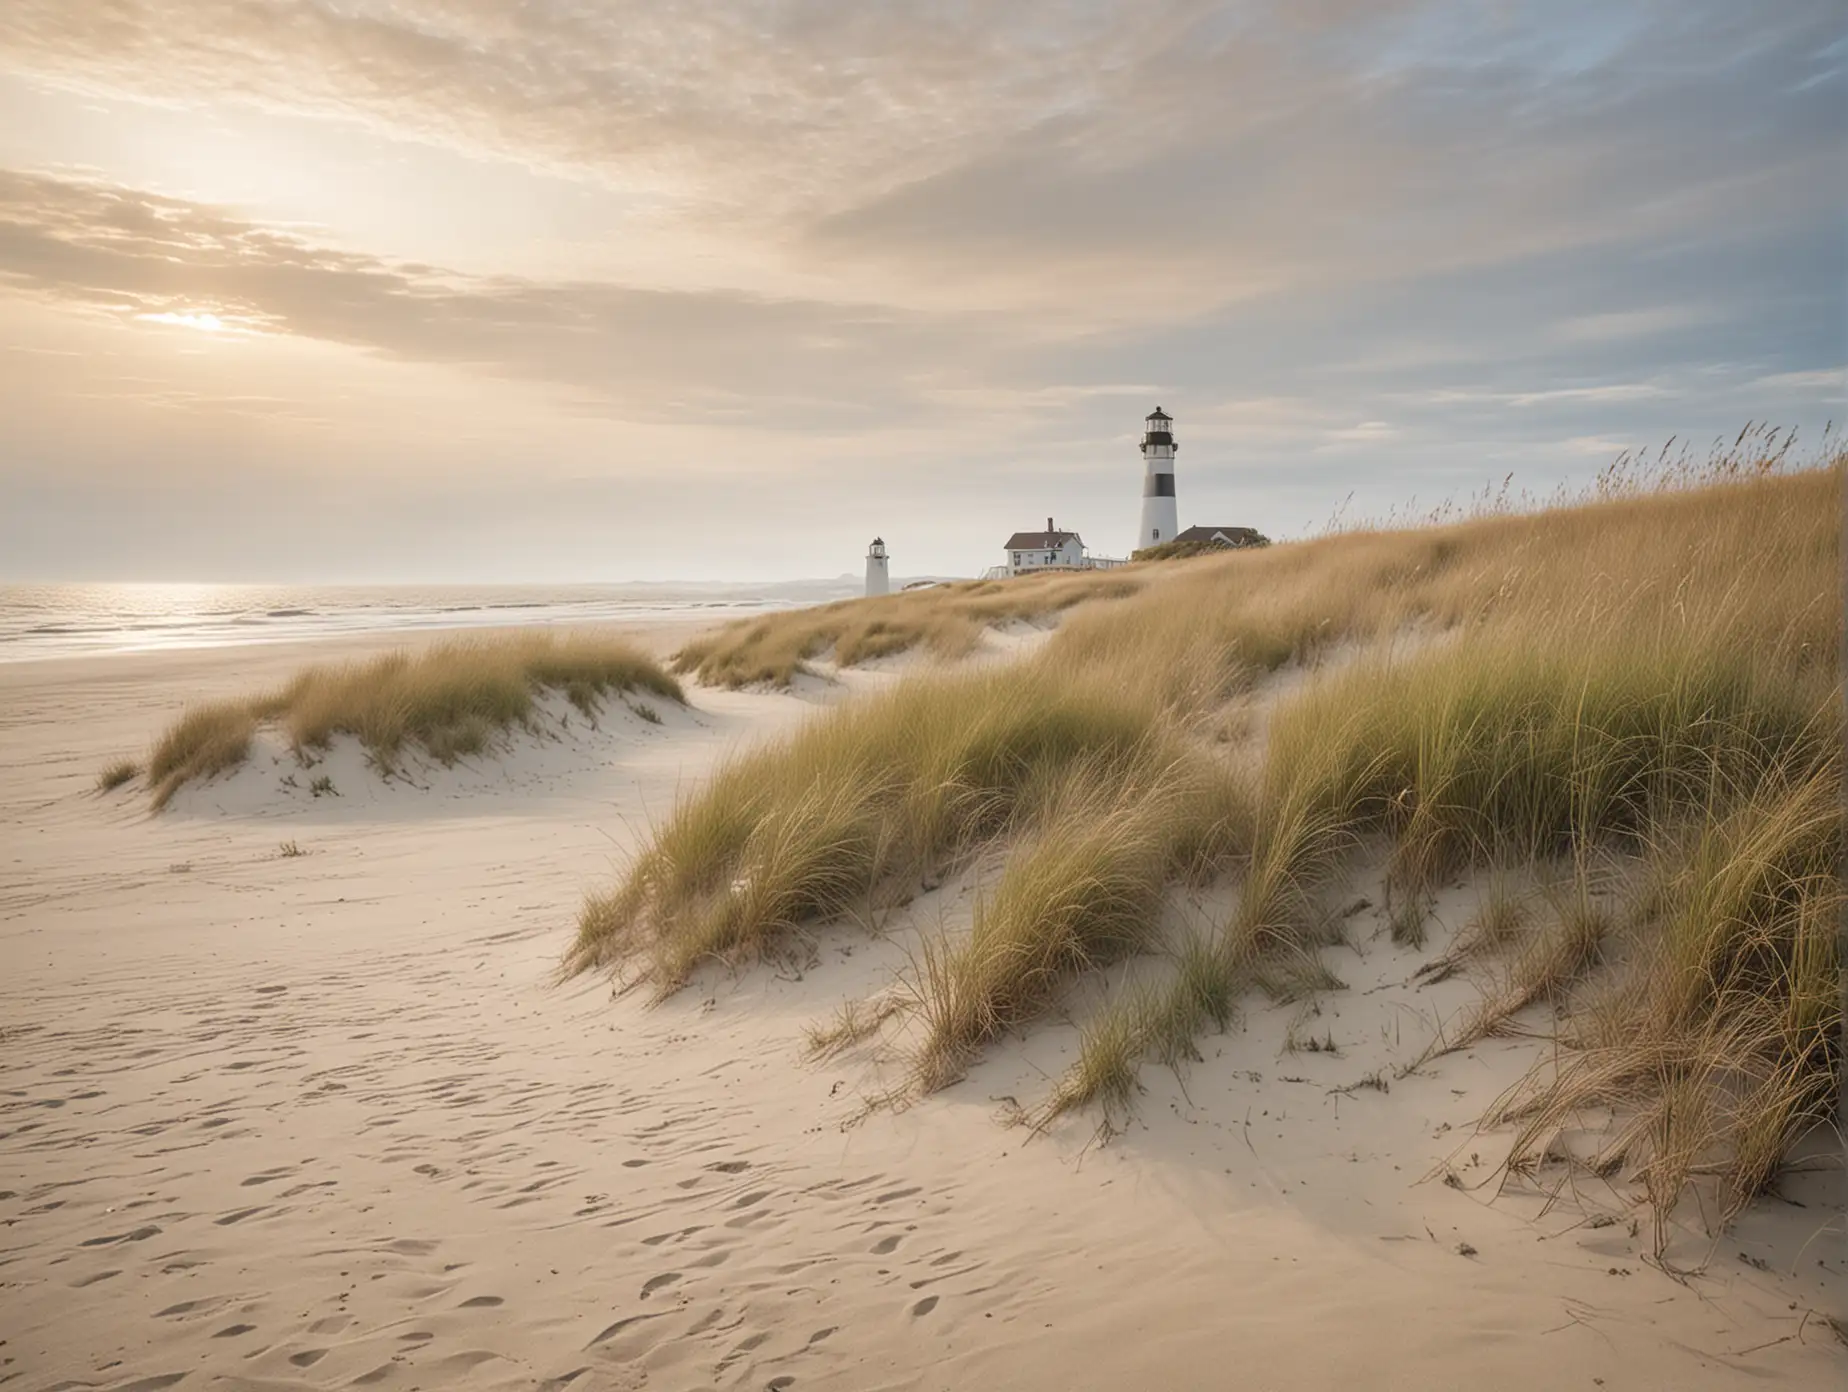 Create a tranquil coastal scene with soft, windswept sand dunes in the foreground, featuring delicate, long beach grasses swaying gently. The grasses have a light, golden hue, and the sand displays natural ripples. In the background, there is a slightly blurred classic white lighthouse with a black top, standing tall on a small hill. The horizon is shrouded in a gentle, atmospheric mist, blending seamlessly into the soft, grayish-blue sky and water. Use a muted color palette with shades of beige, gray, and light blue to create a dreamy, ethereal ambiance. The lighting is diffuse, enhancing the serene and peaceful mood of the scene.